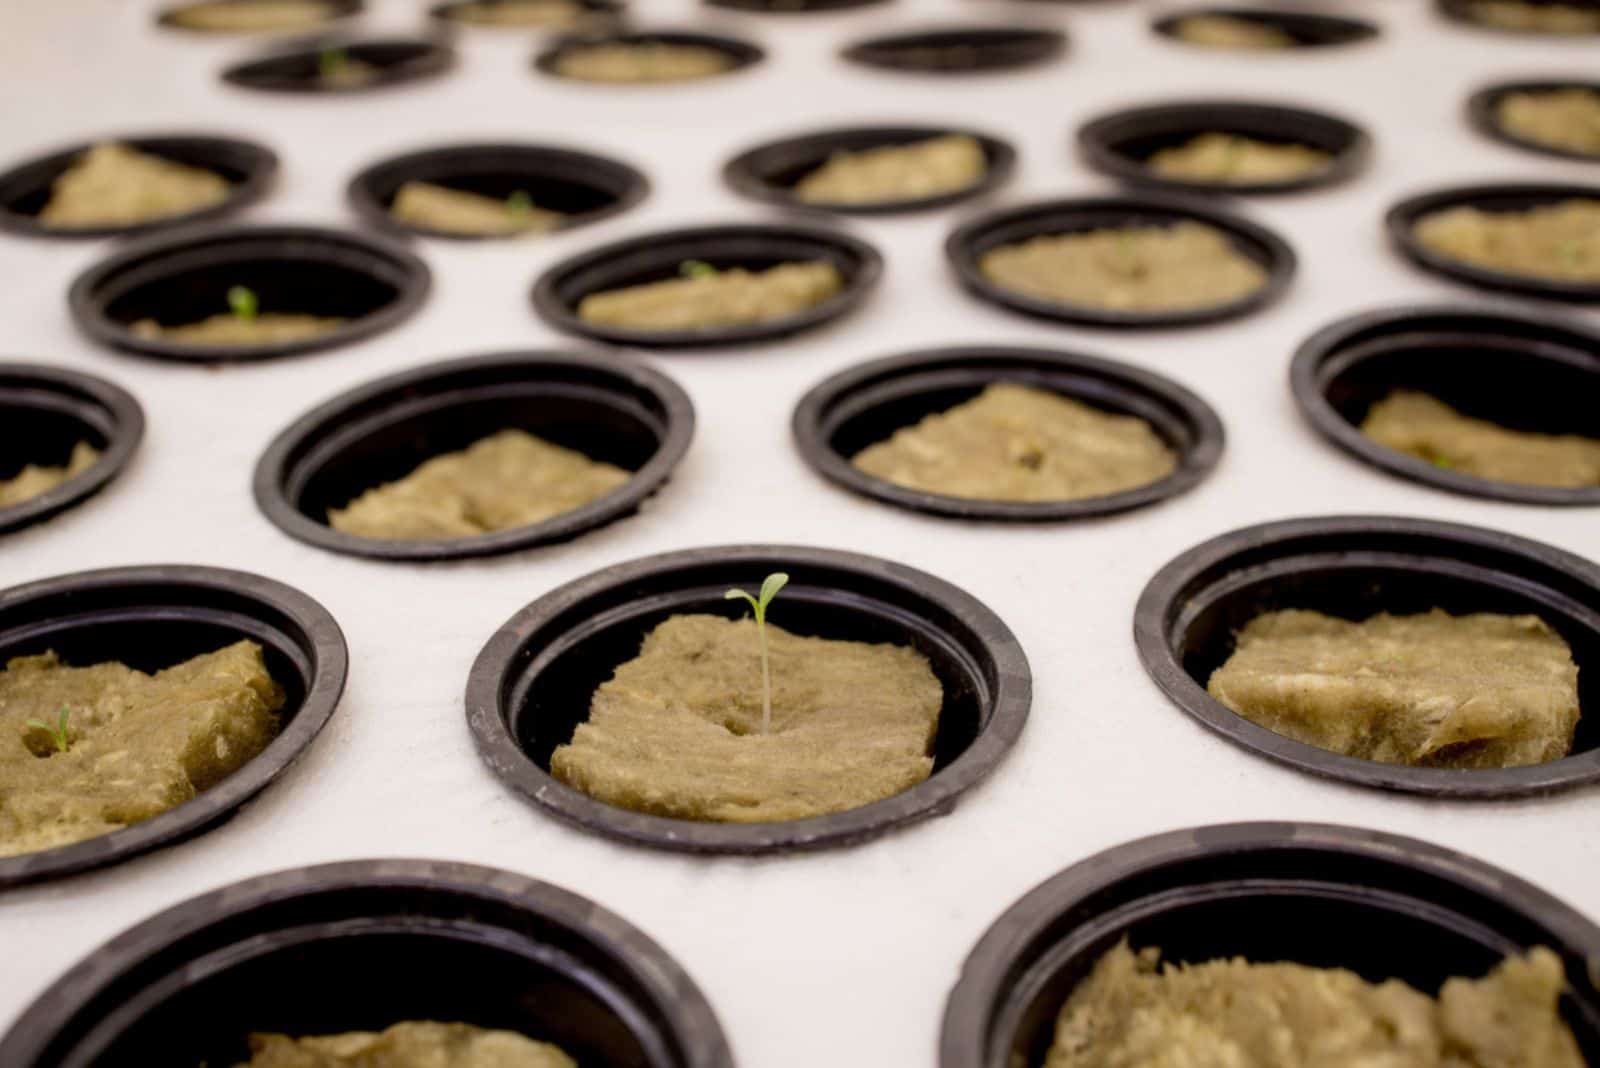 Germination on rockwool for hydroponic